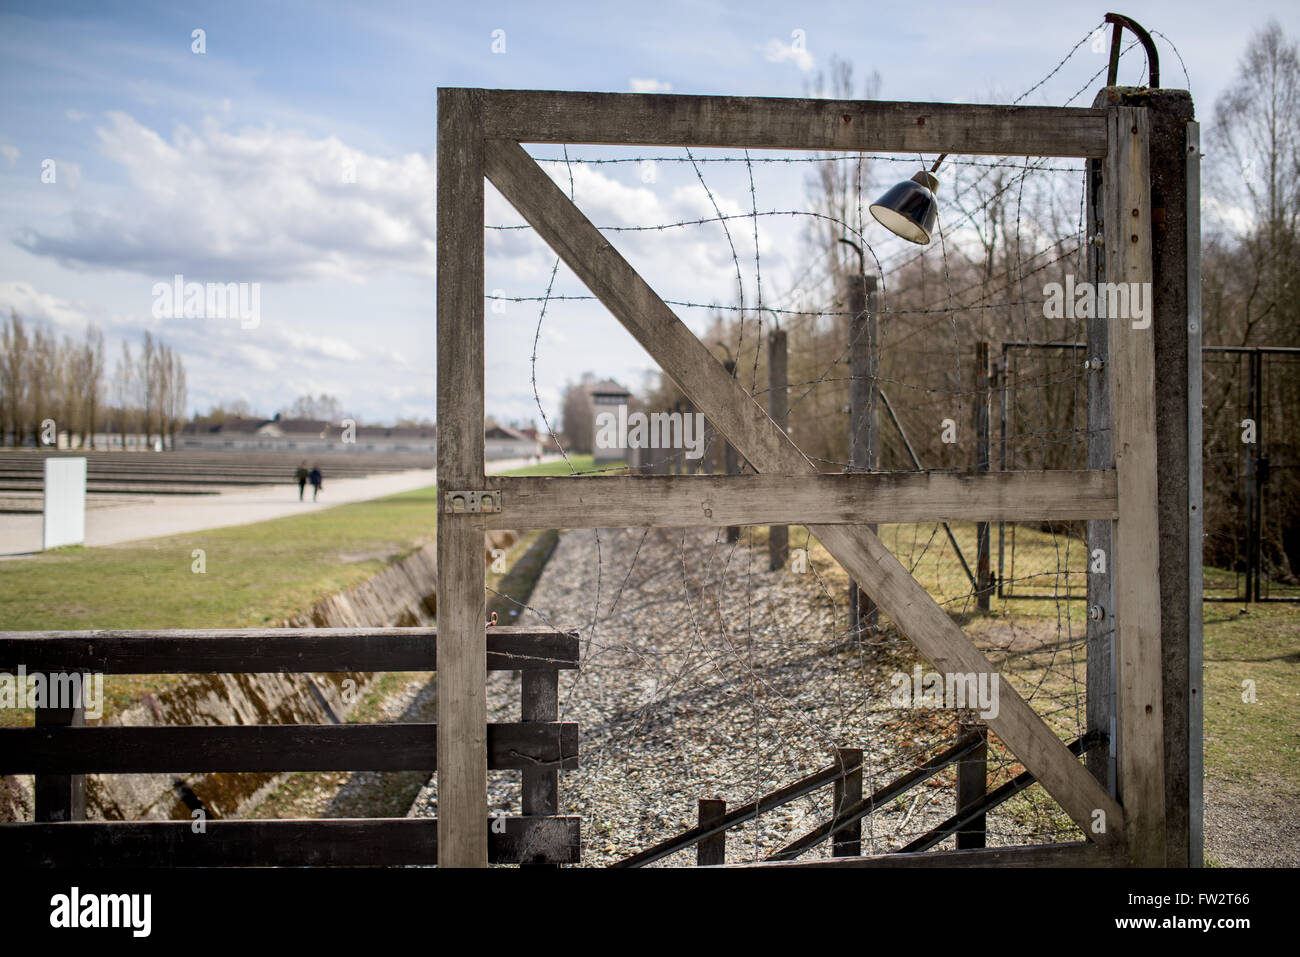 Fence around Dachau concentration camp Stock Photo